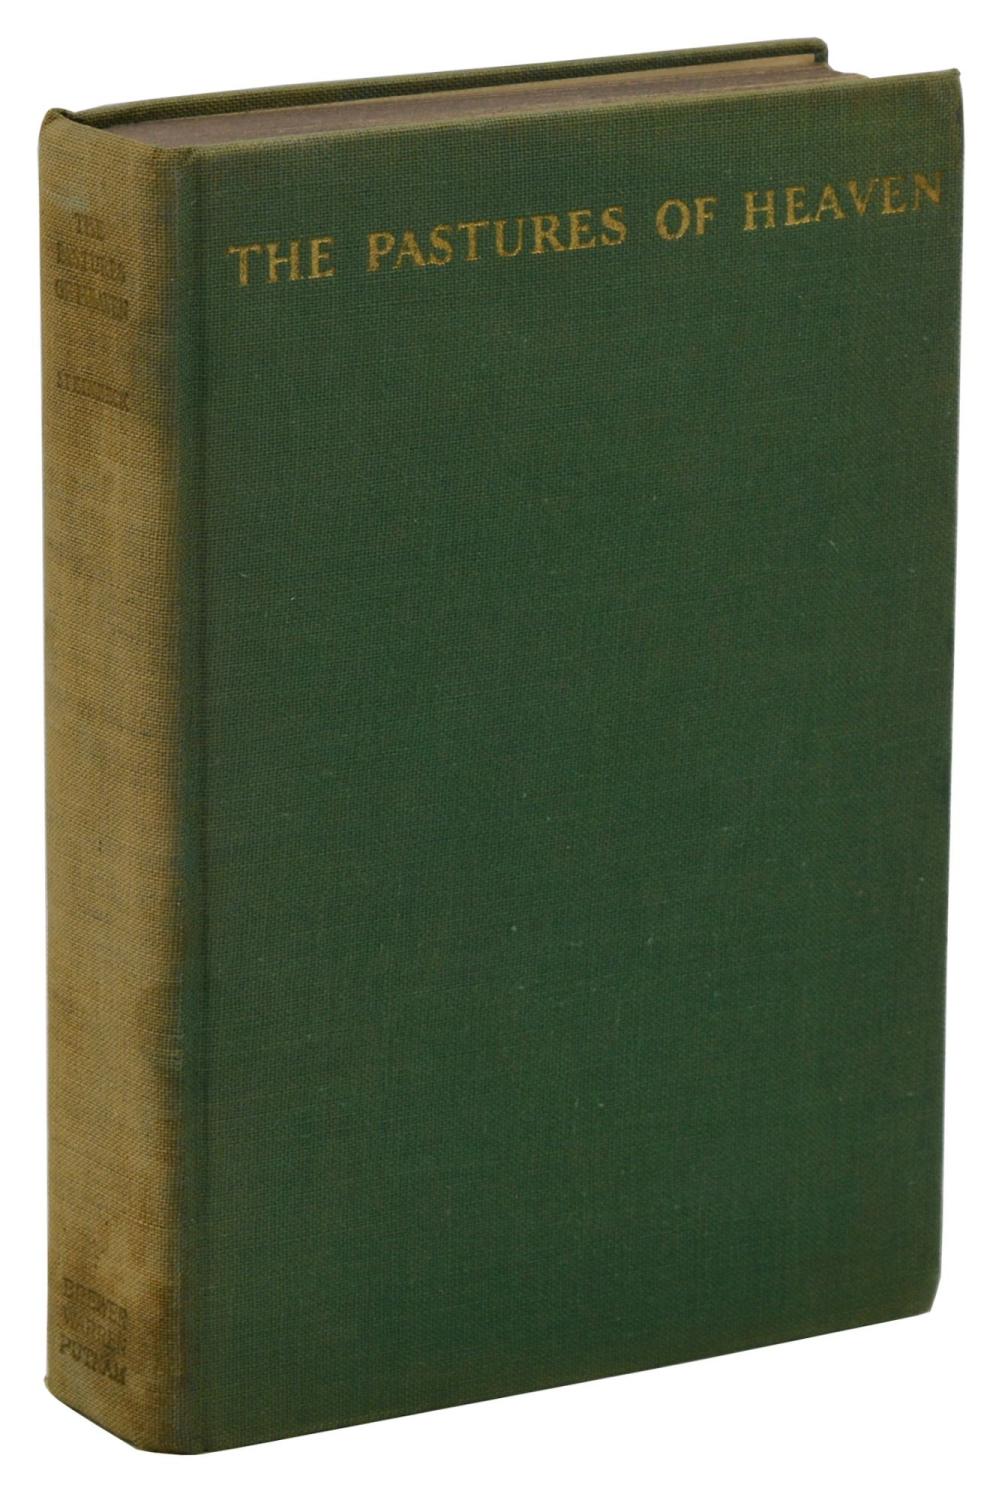 The Pastures of Heaven by Steinbeck, John: Very Good (1932) First ...